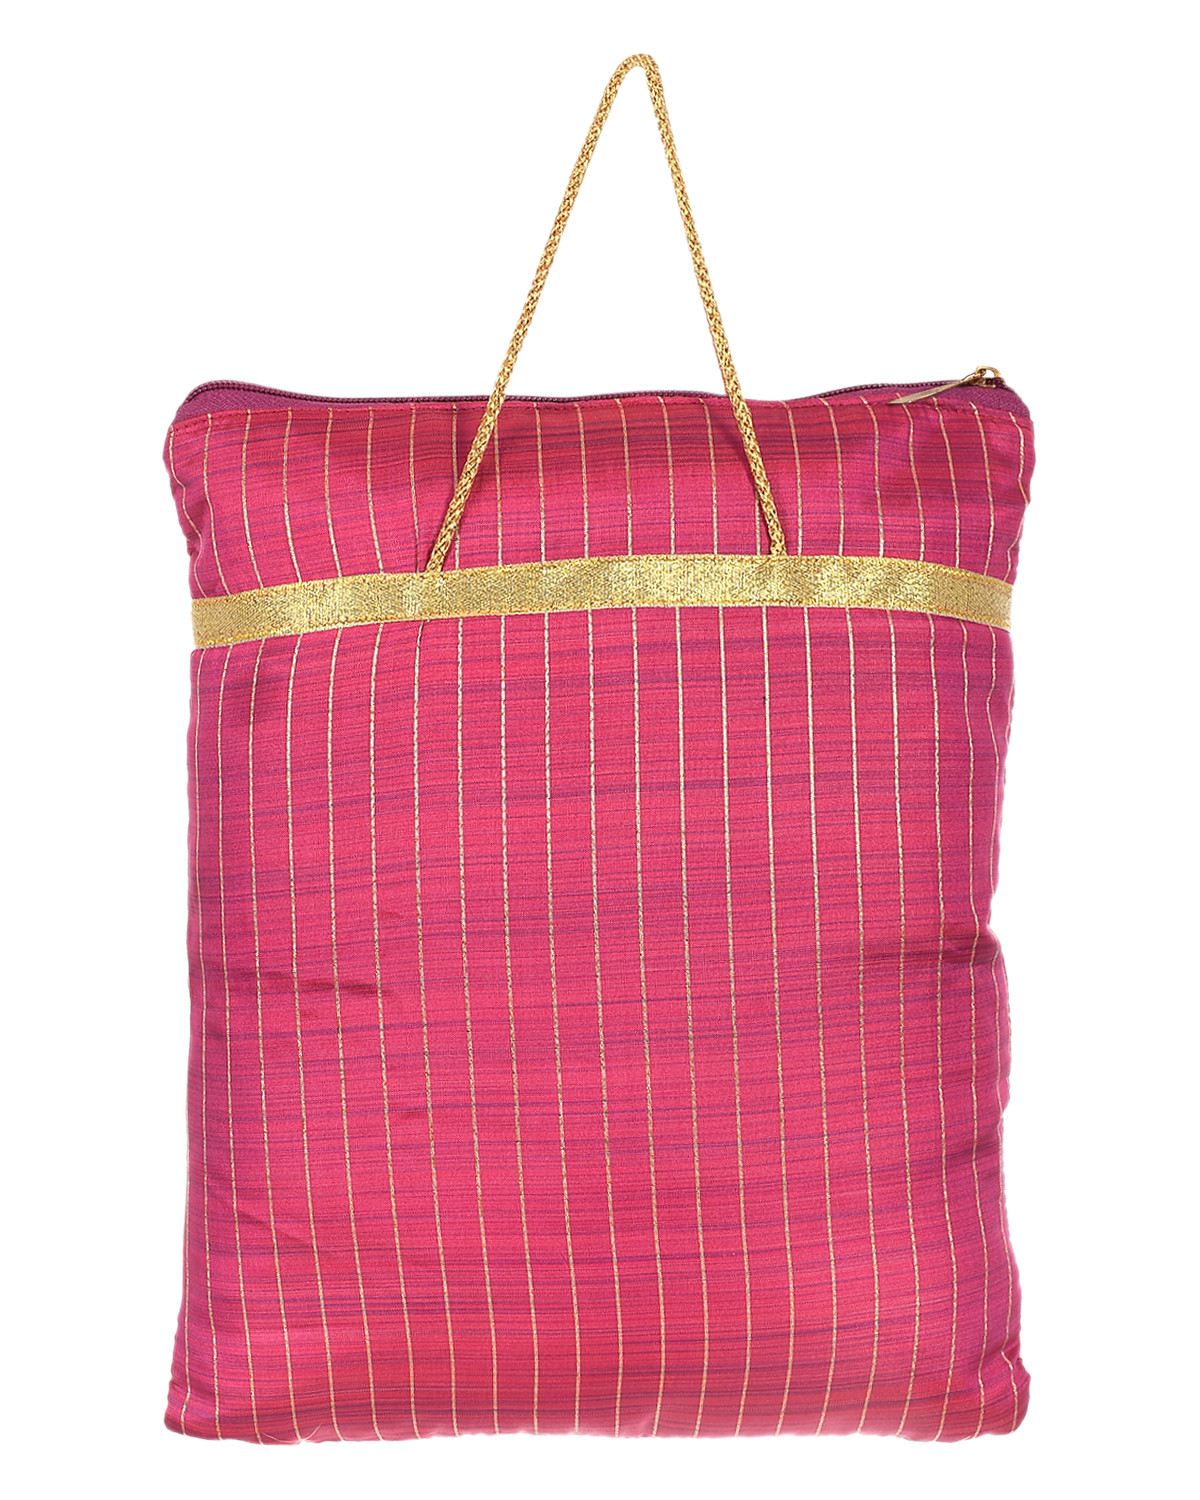 Kuber Industries Polyester Strips Print Hand Bag/Grocery Bag For Women/Girls With Handle(Light Pink) 54KM4045